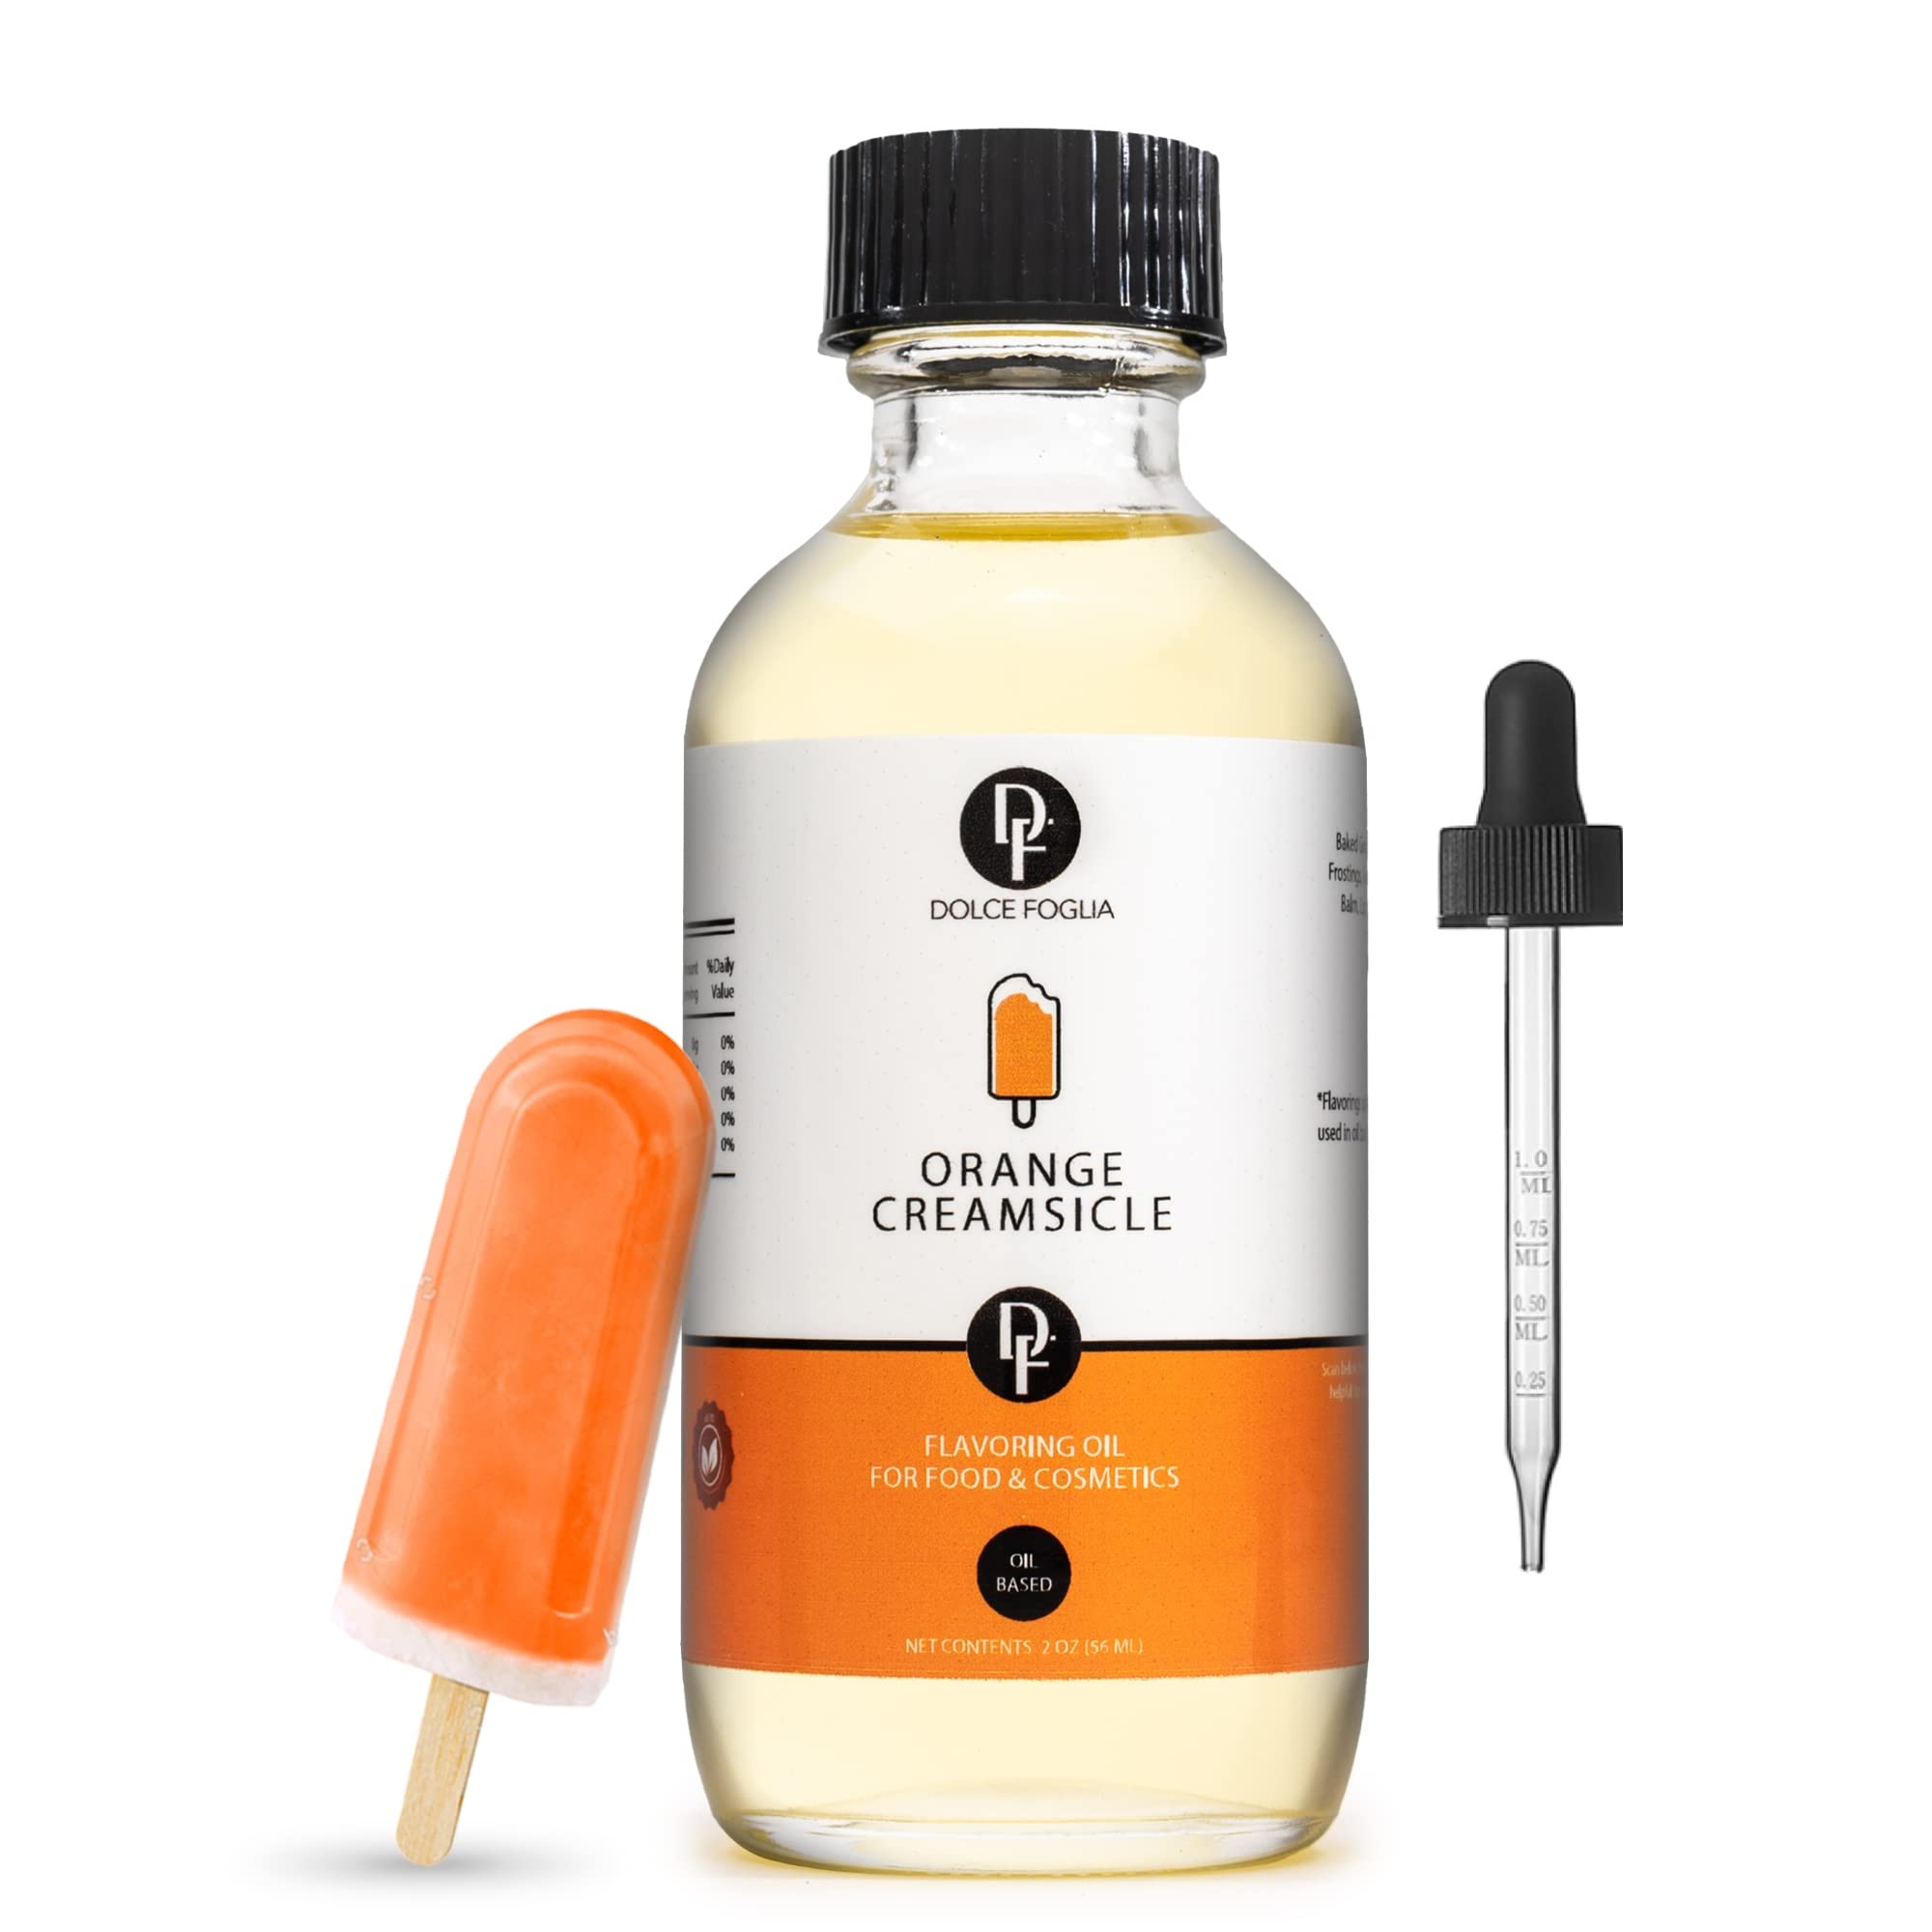 Dolce Foglia Orange Creamsicle Flavoring Oils - 2 Oz. Multipurpose  Flavoring Oil for Candy Making, Extracts and Flavorings for Baking, Lip  Balm, Ice Cream, Ultra Concentrated All Natural Ingredients Orange  Creamsicle 2 Oz.